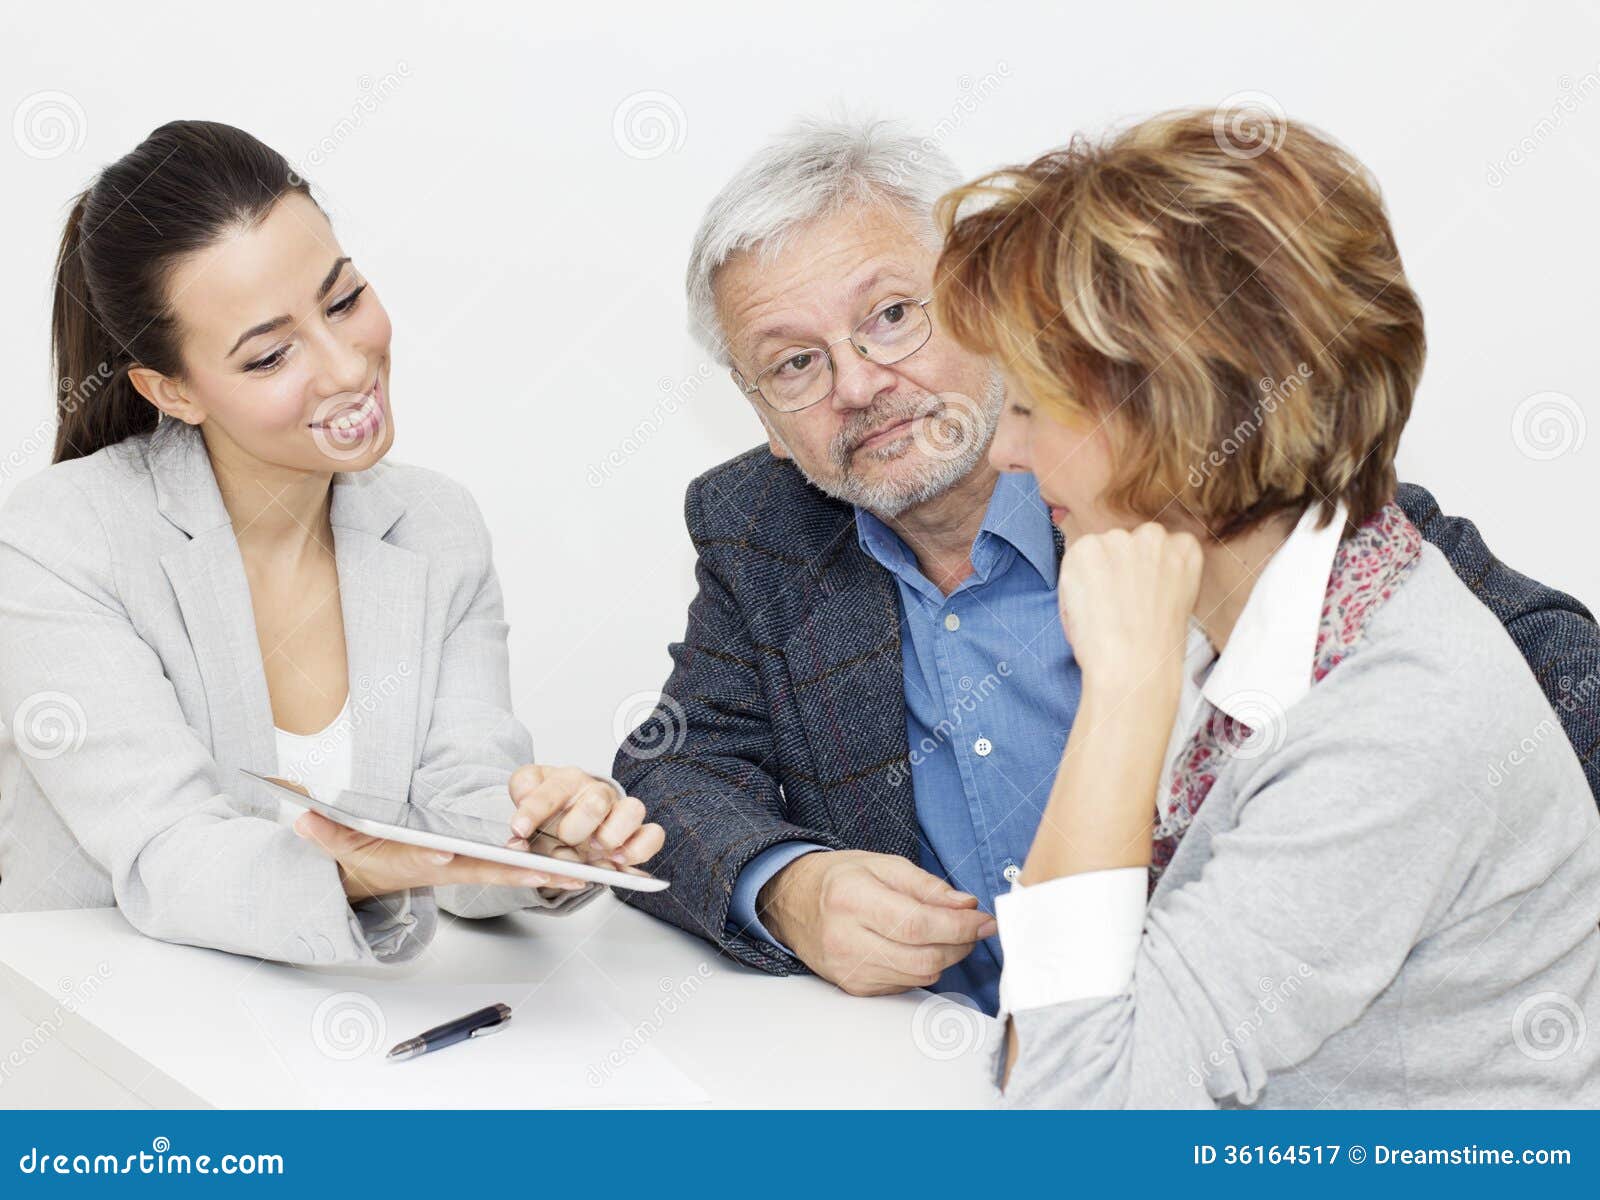 Mature Couple In Meeting With Financial Advisor Stock Image Image Of Guidance Communication